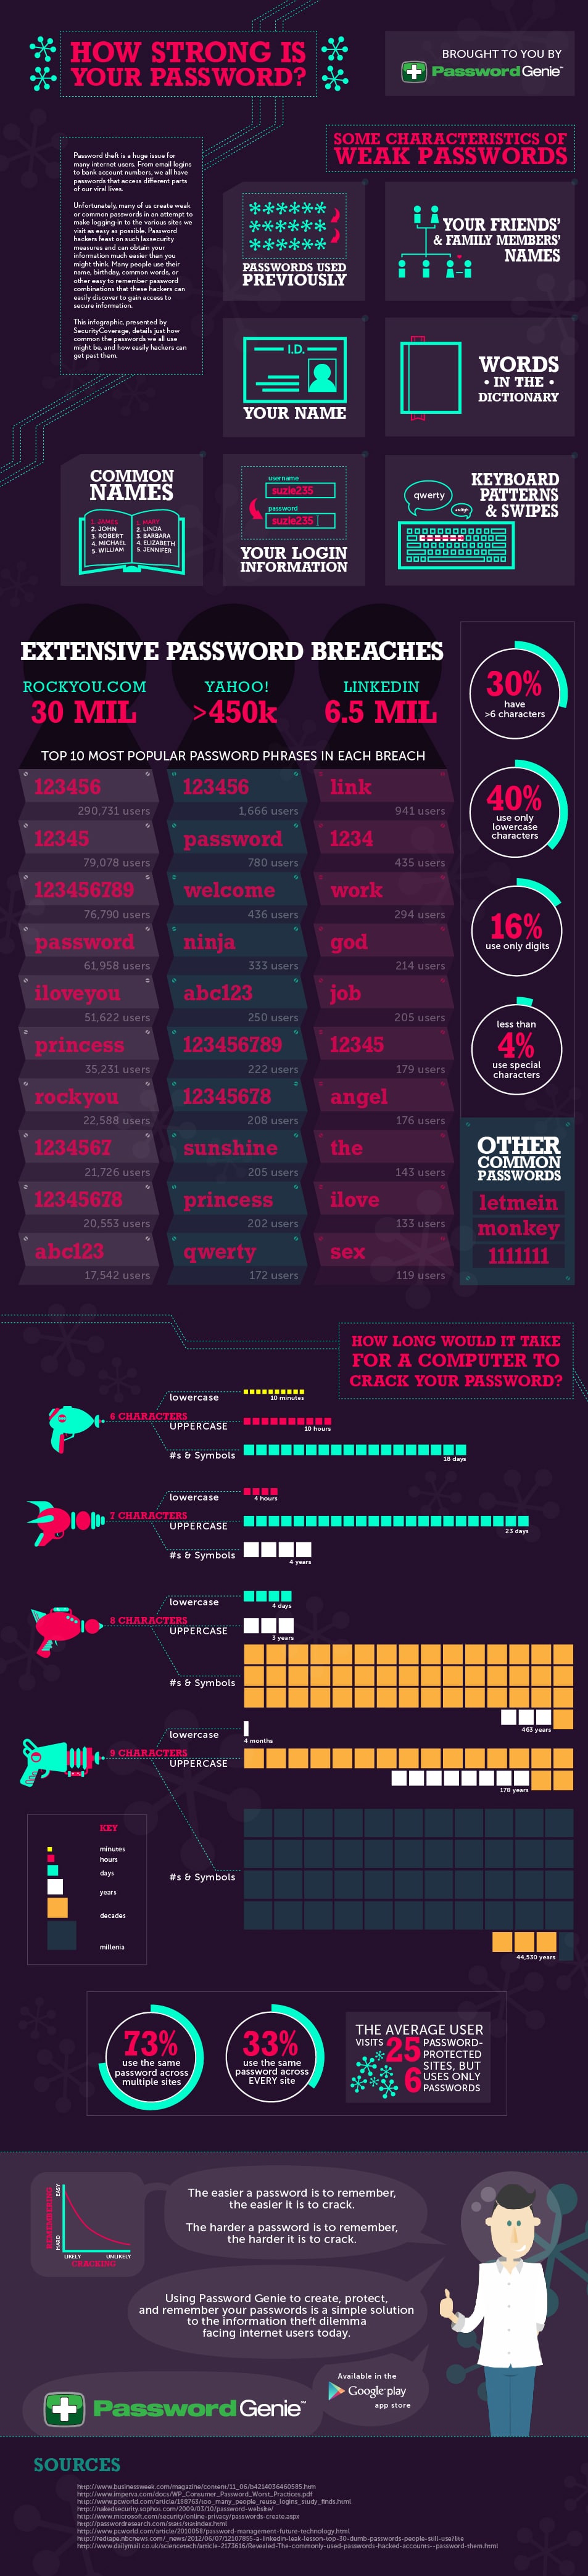 Password Strength: How Strong Is Your Password? [Infographic]